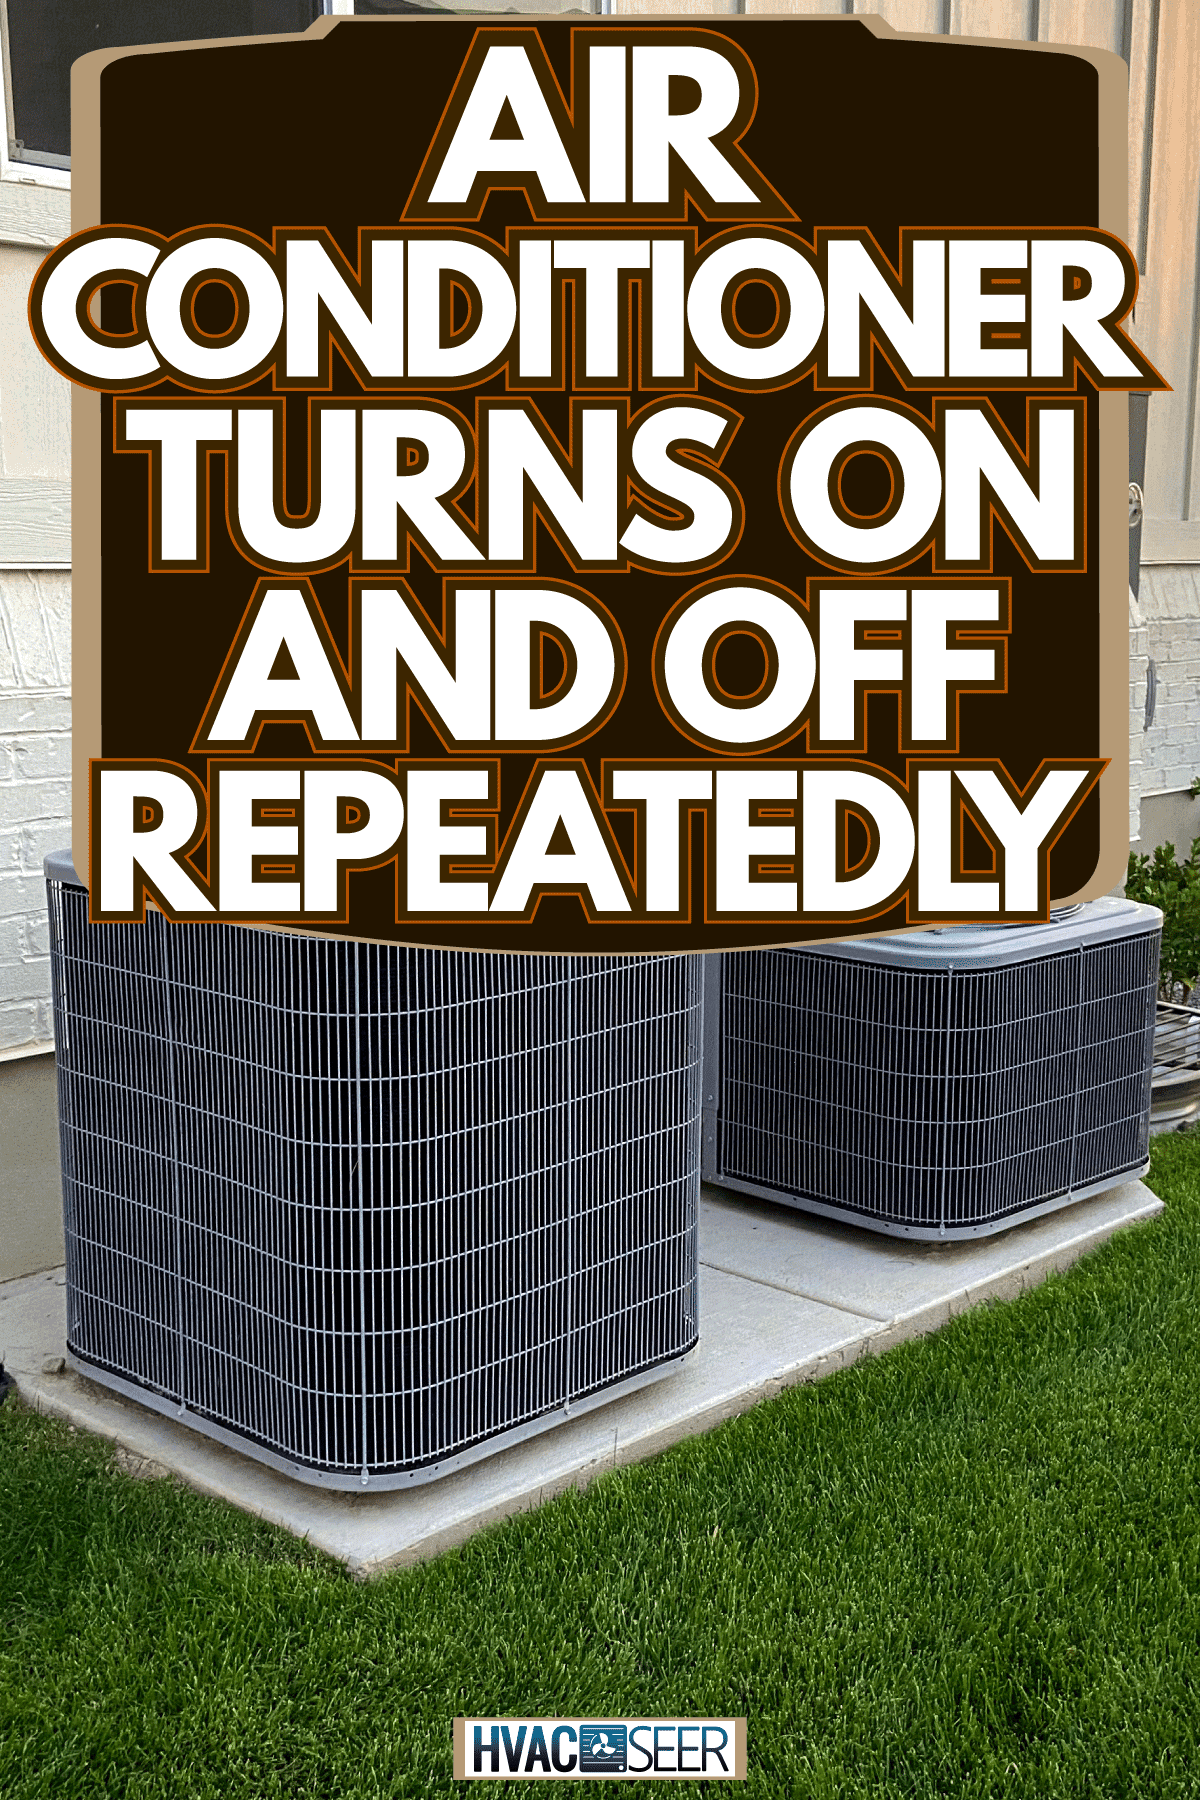 Double air conditioning unit mounted on small concrete slabs, Air Conditioner Turns On And Off Repeatedly 